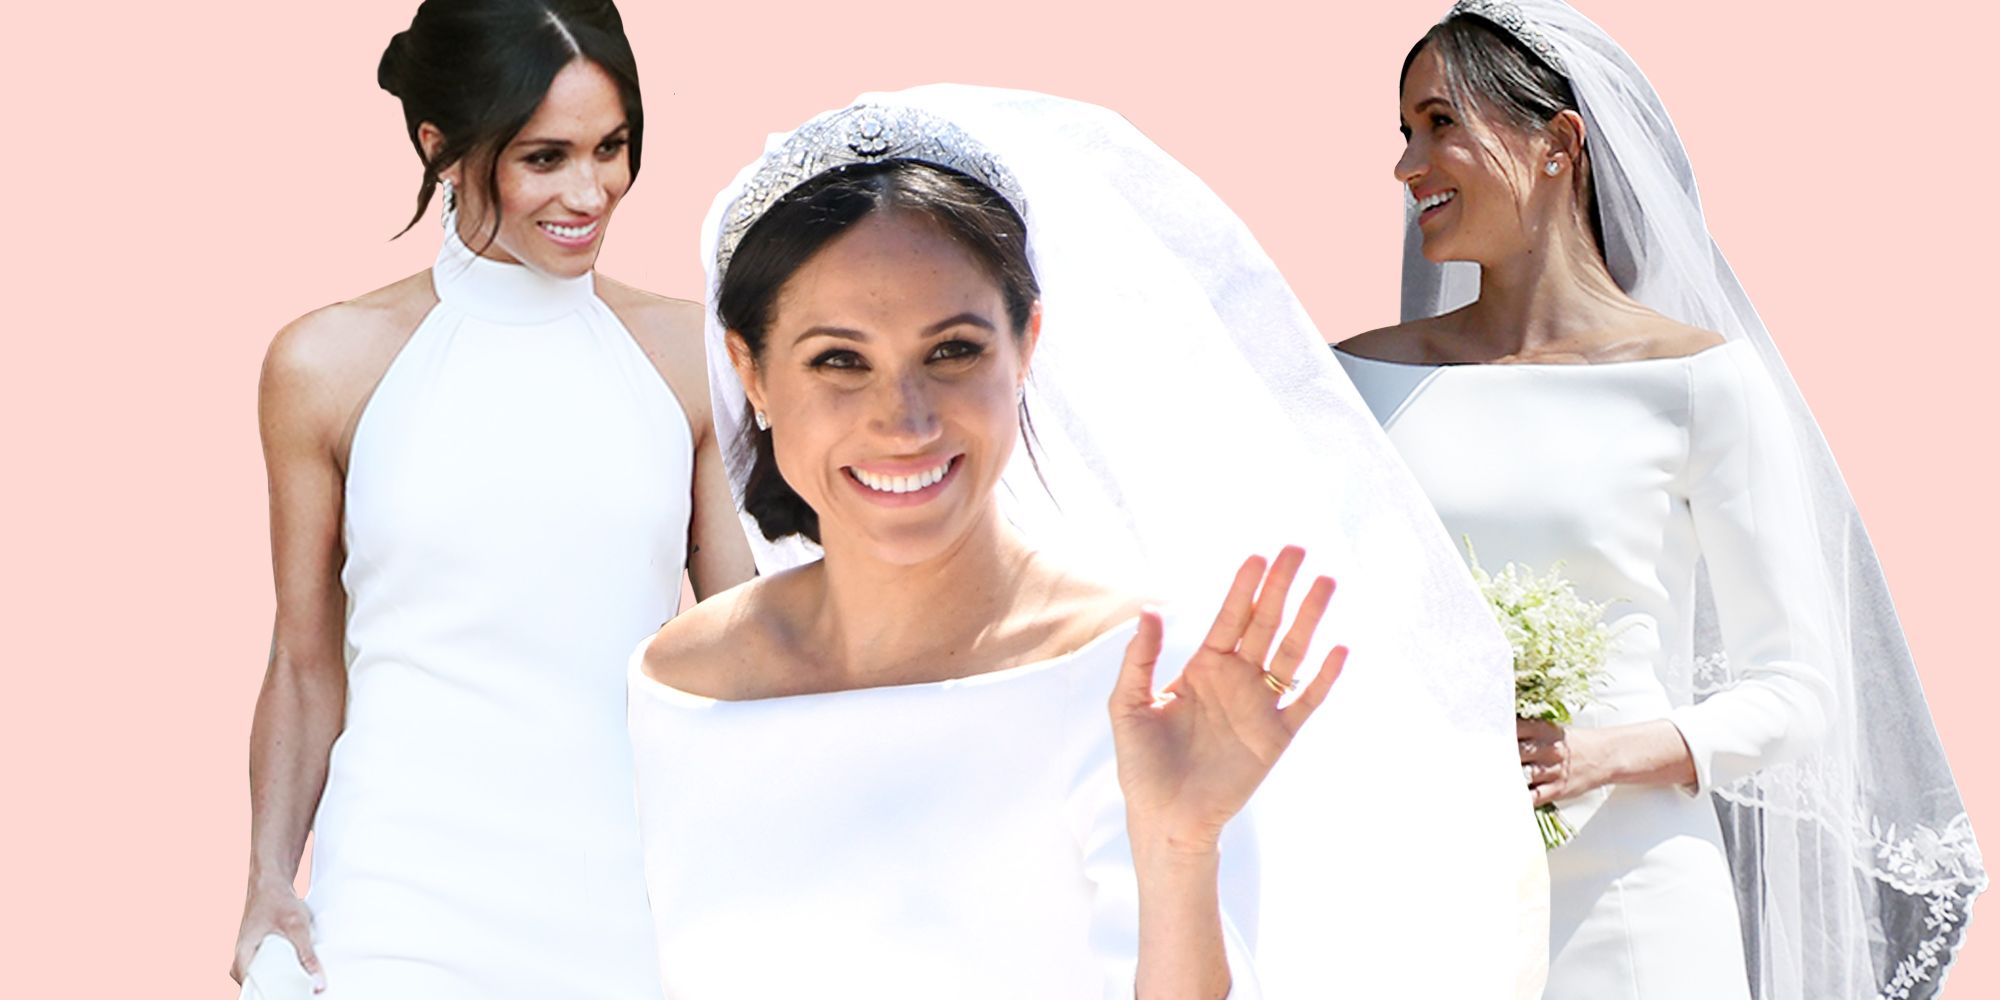 meghan markle effect on the bridal industry